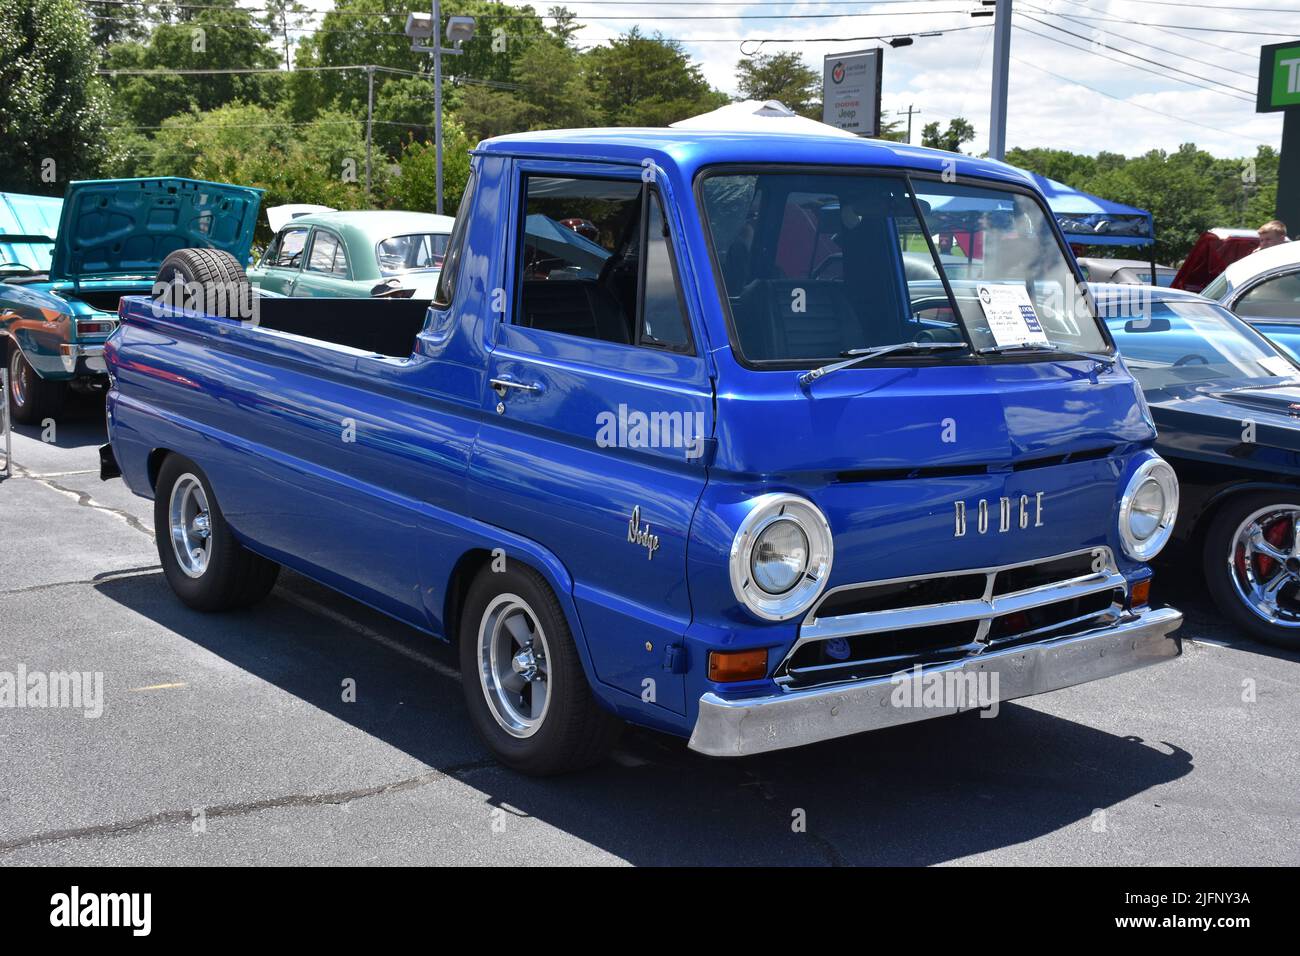 A 1966 A100 Dodge Pickup Truck on display at a car show. Stock Photo